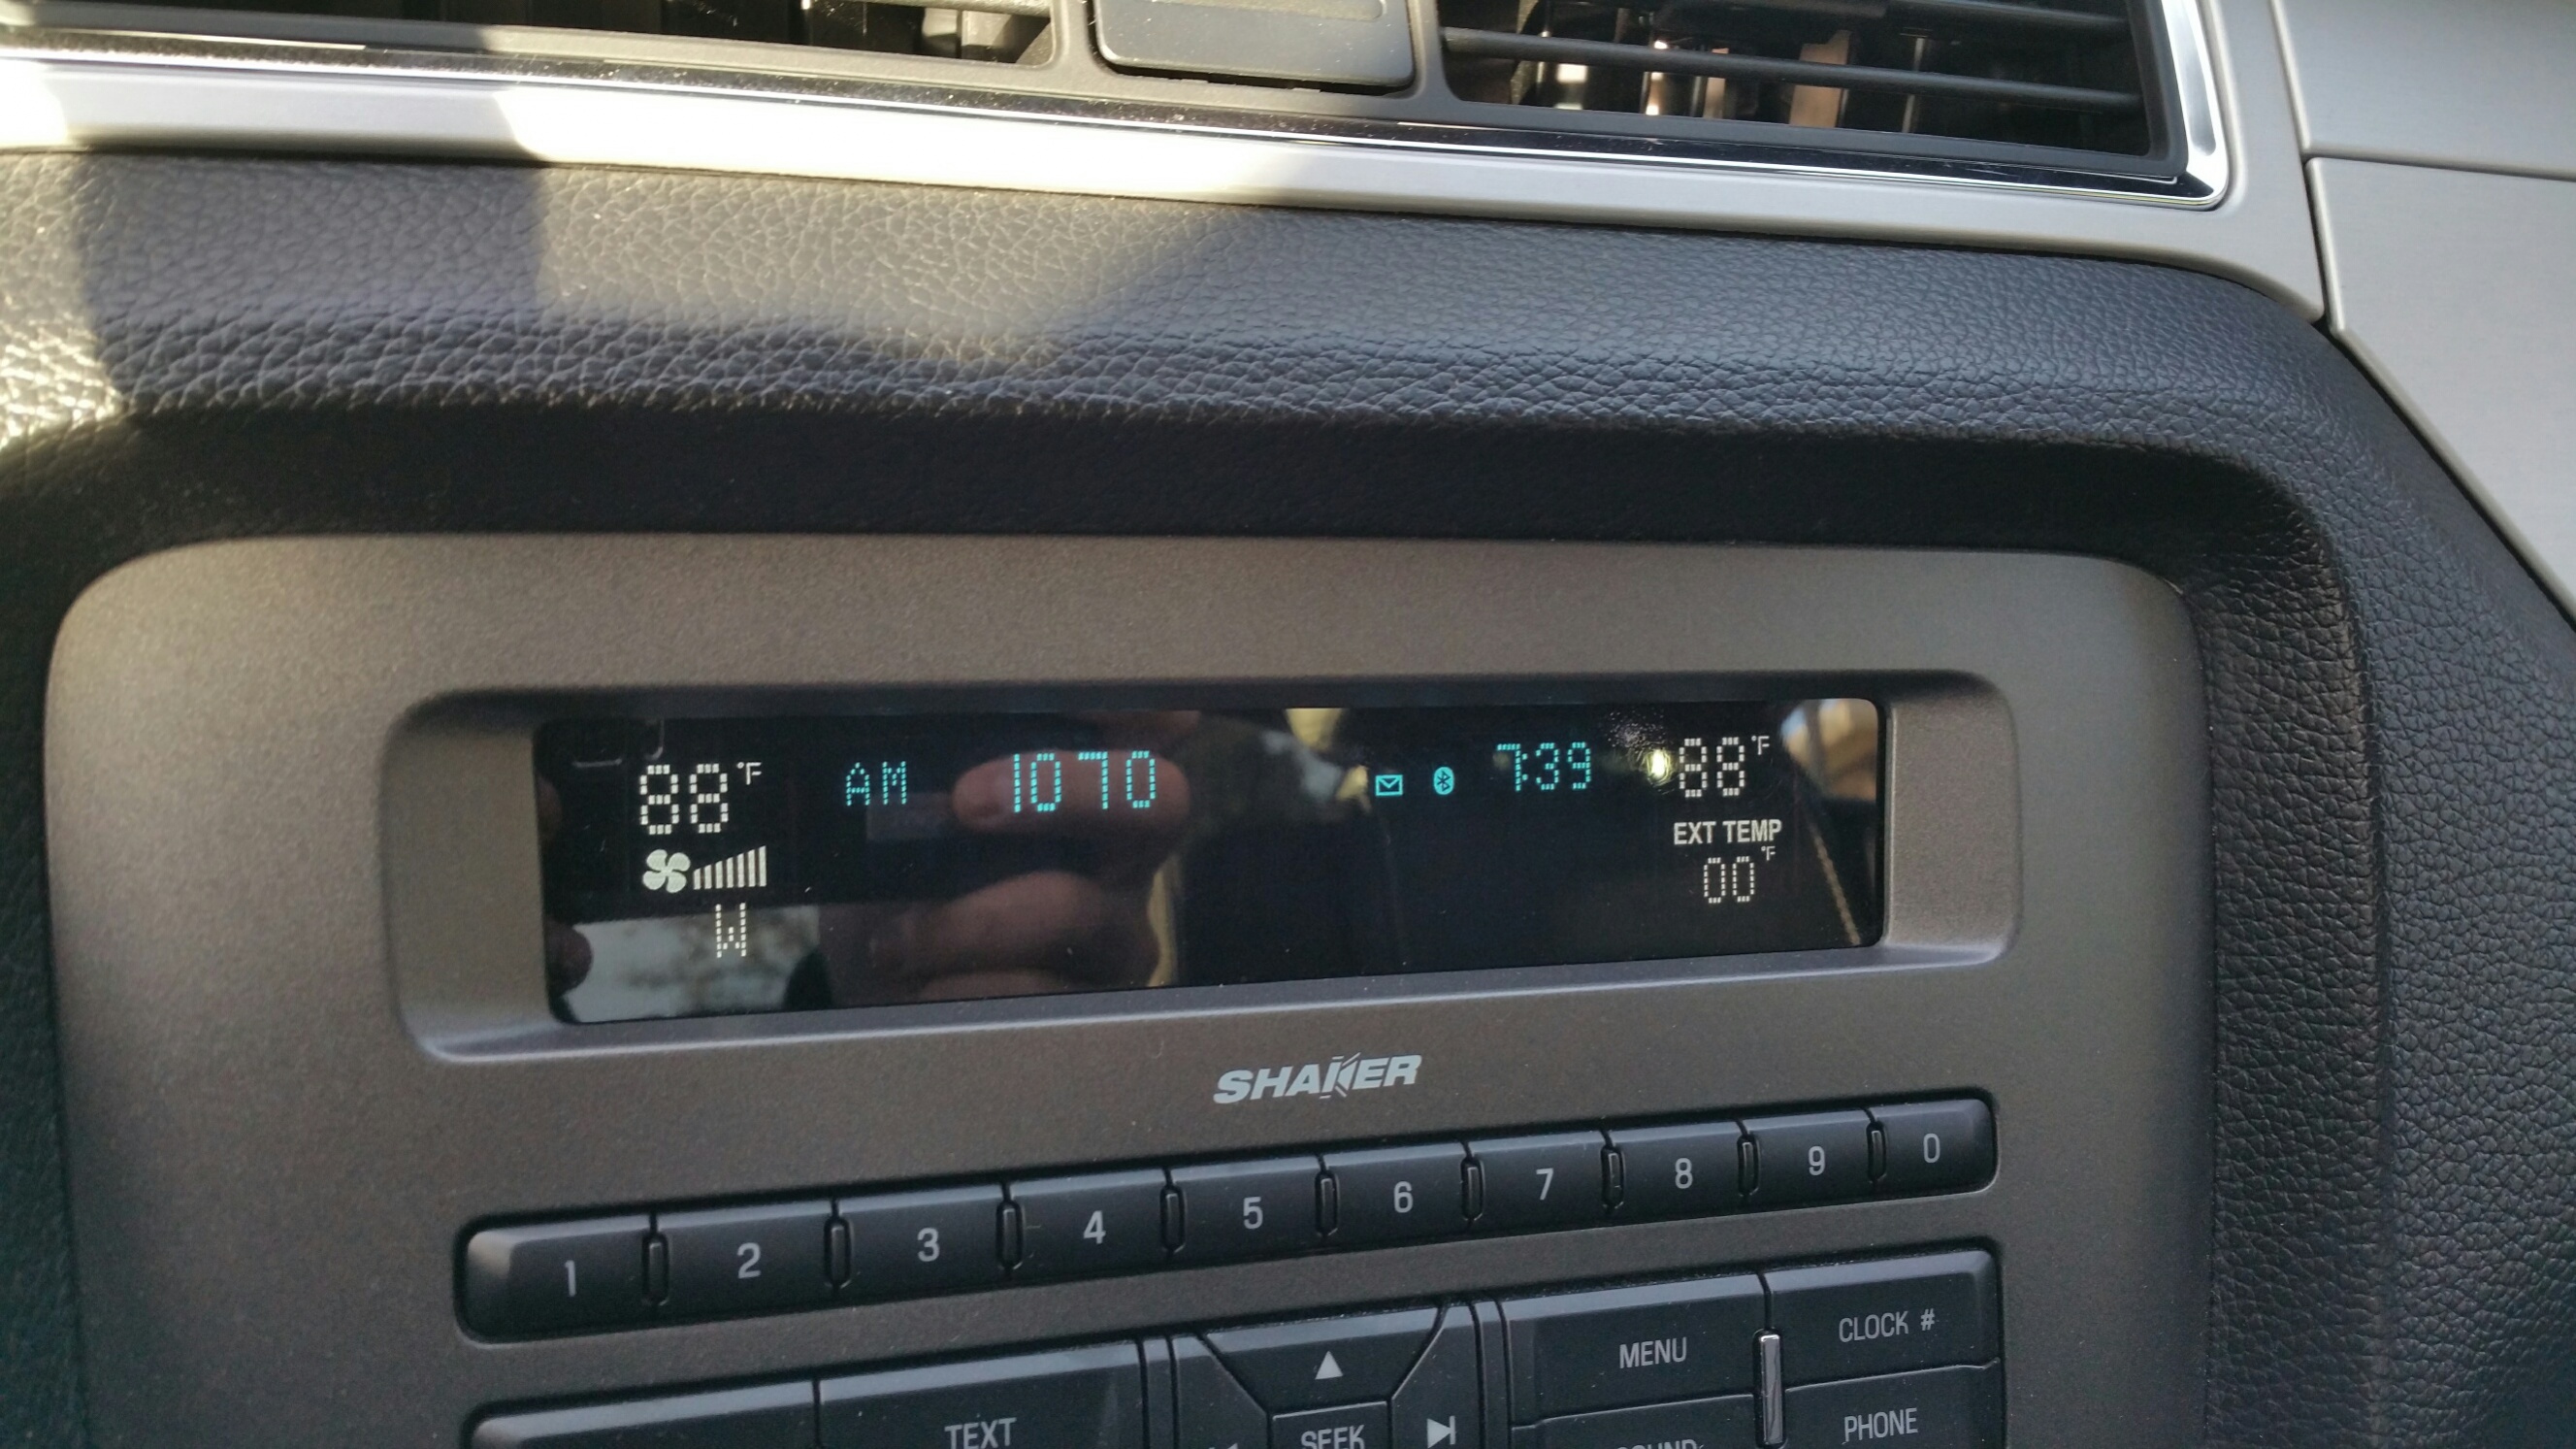 Air conditioning symbol in LCD screen - The Mustang Source - Ford Mustang  Forums